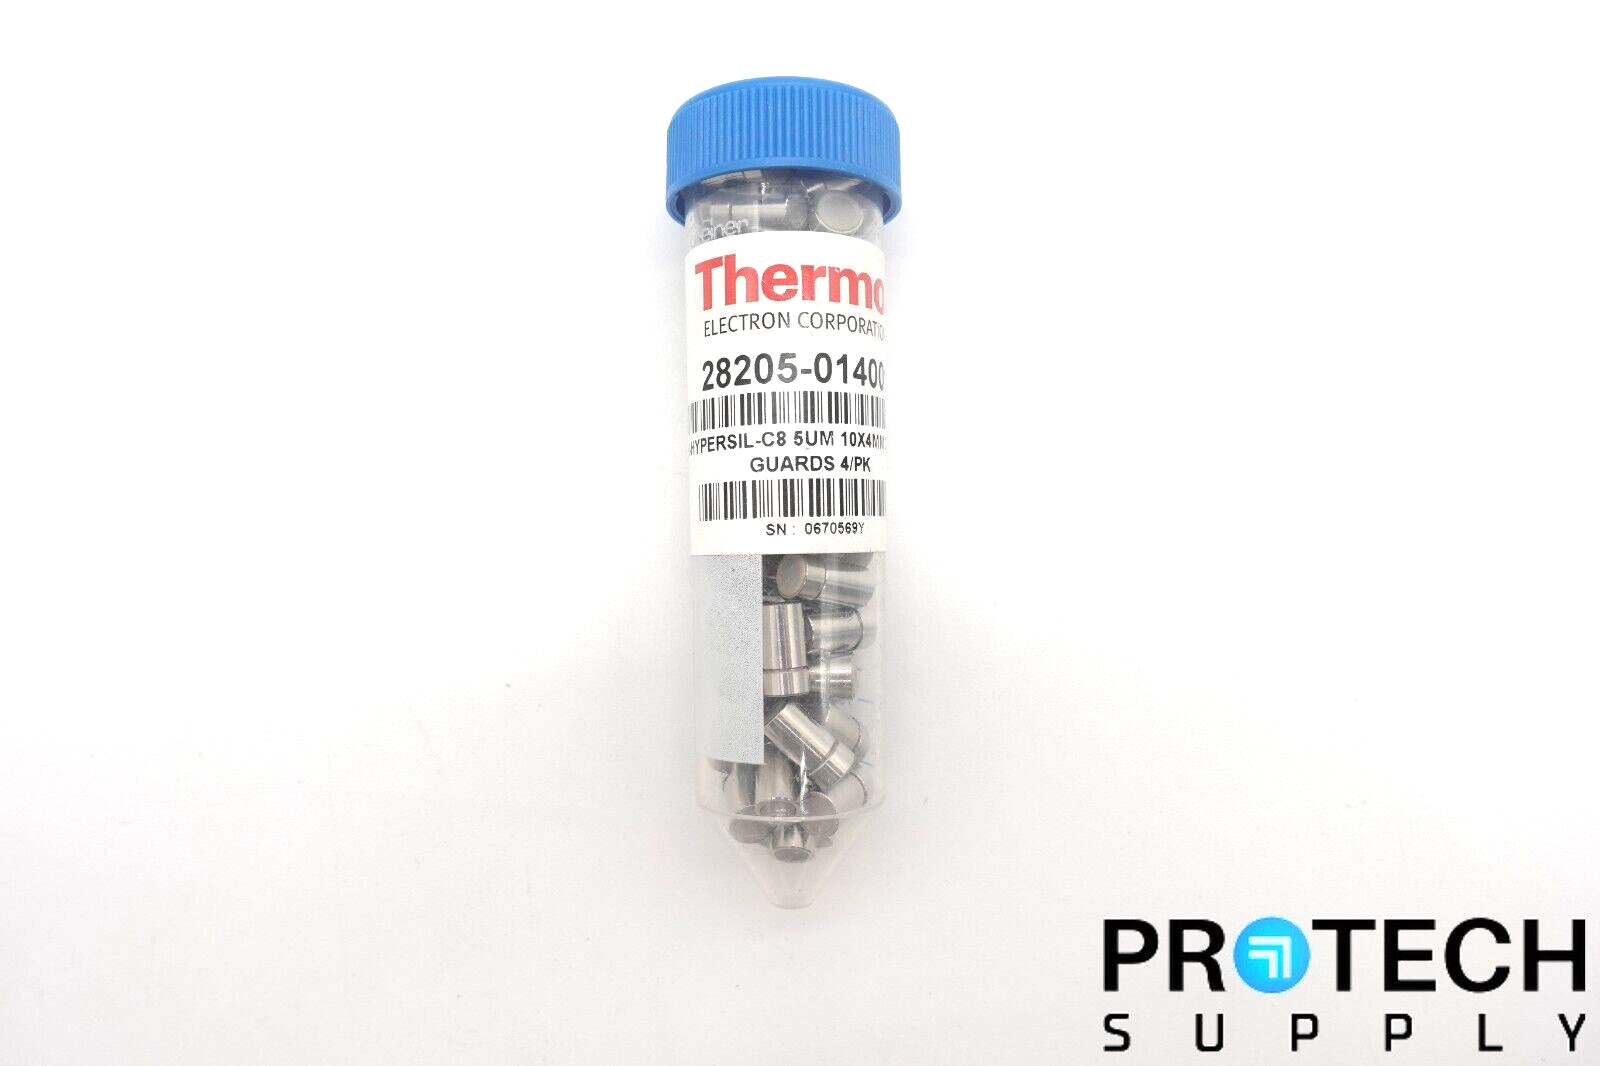 Thermo Hypersil 28205-014001 C8 10x4mm Drop-In Gua